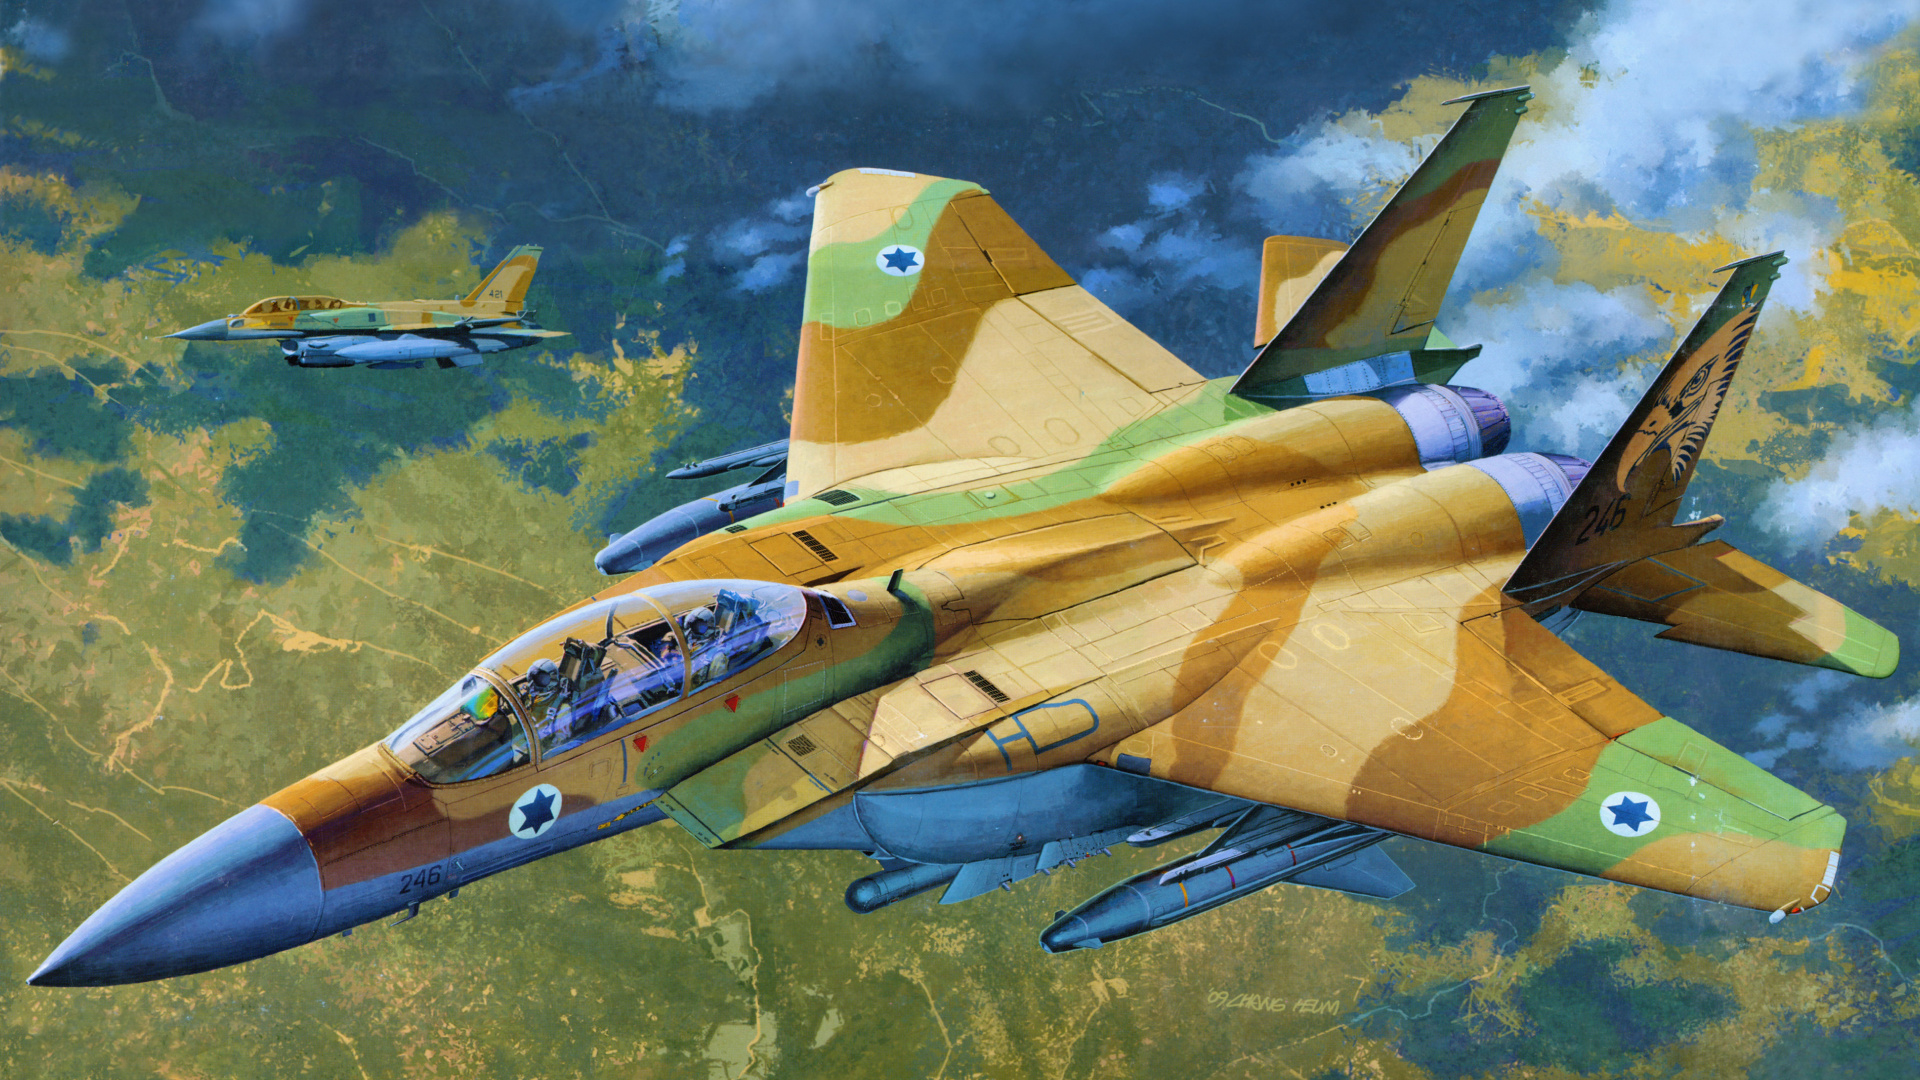 Yellow and Blue Jet Plane. Wallpaper in 1920x1080 Resolution